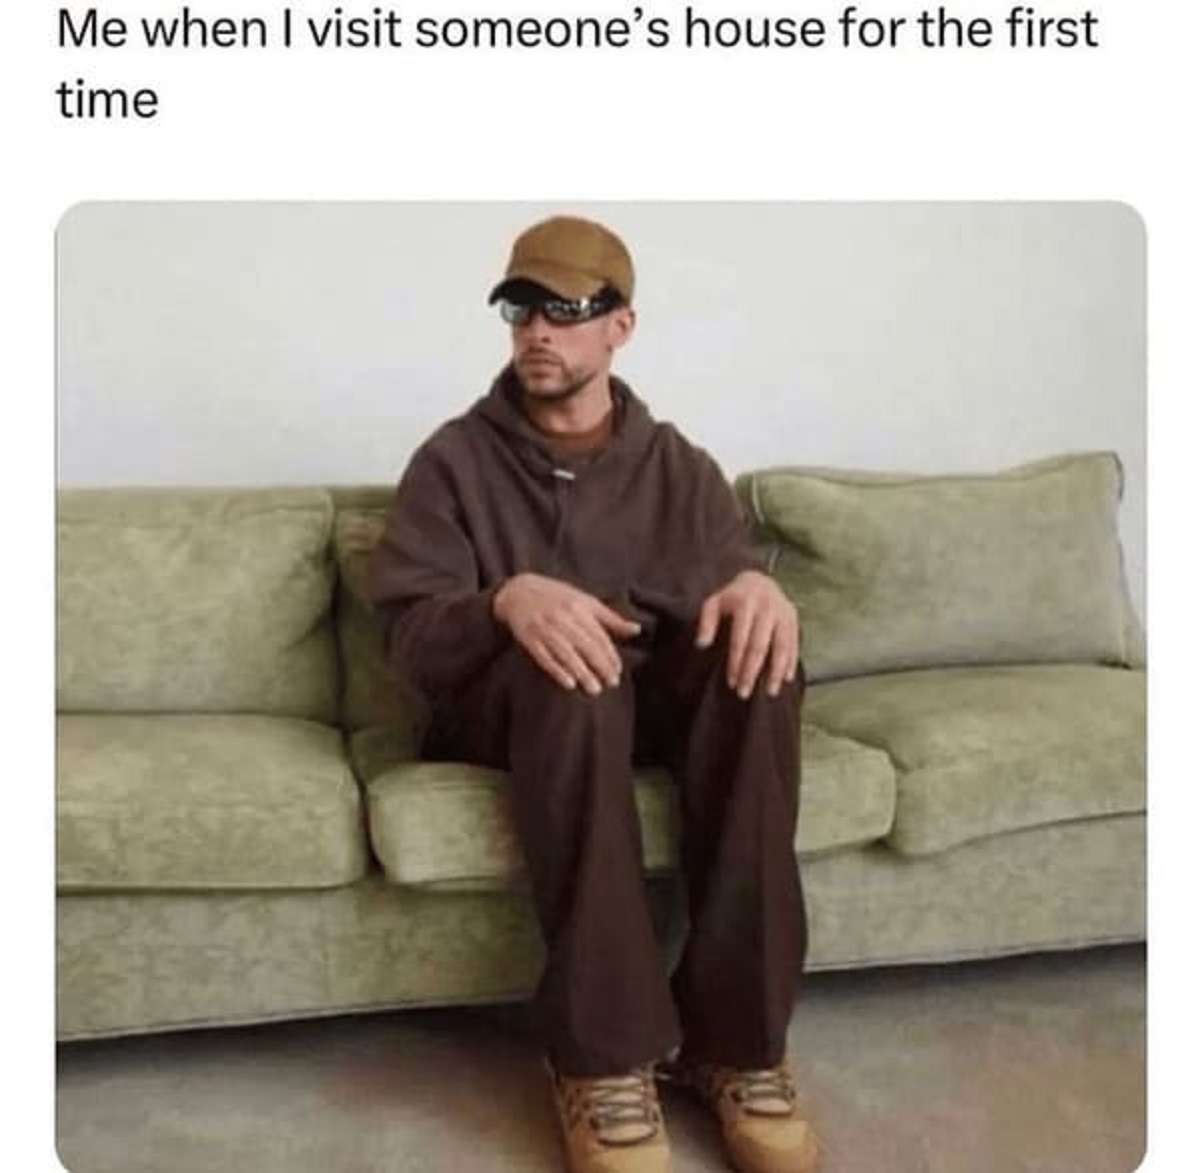 Me when I visit someone's house for the first time